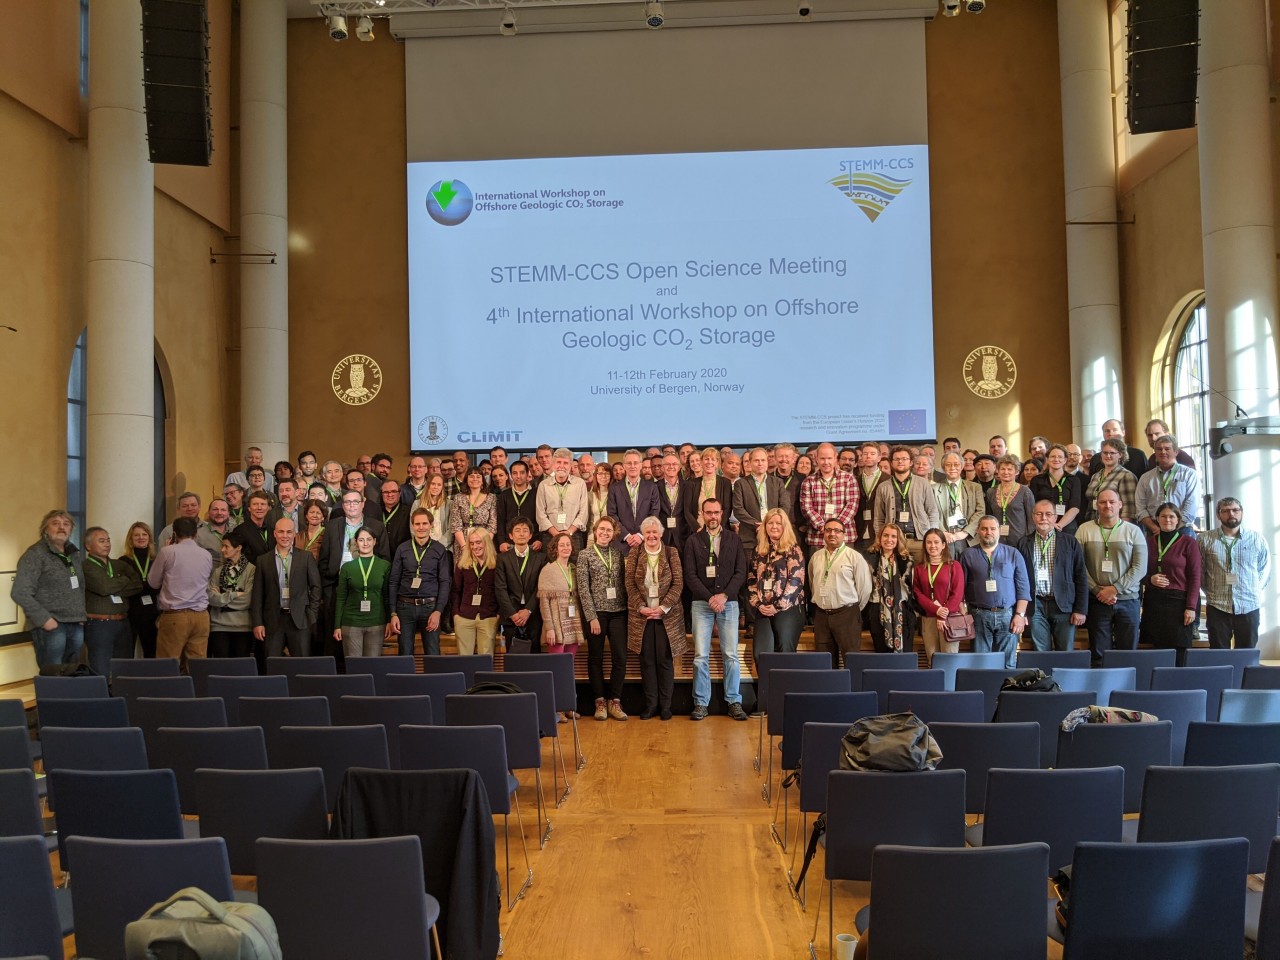 Group photo of the Offshore CCS Workshop and STEMM-CCS Open Science attendees